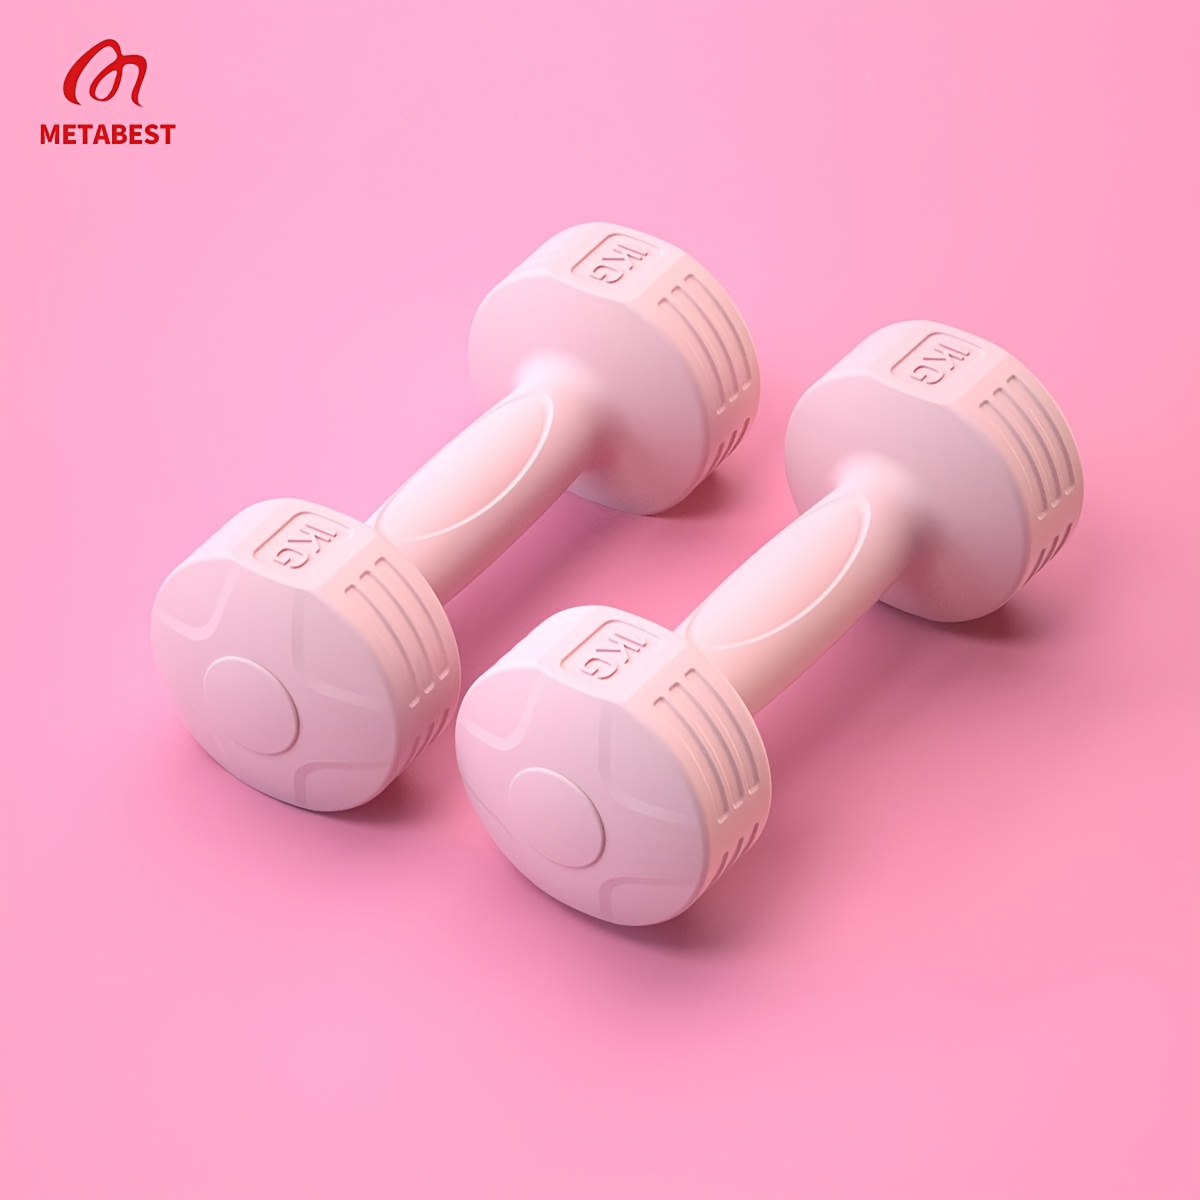 NEW Barbie Fitness Workout Doll 2 Pink Dumbbells ~ Exercise Equipment  Accessory